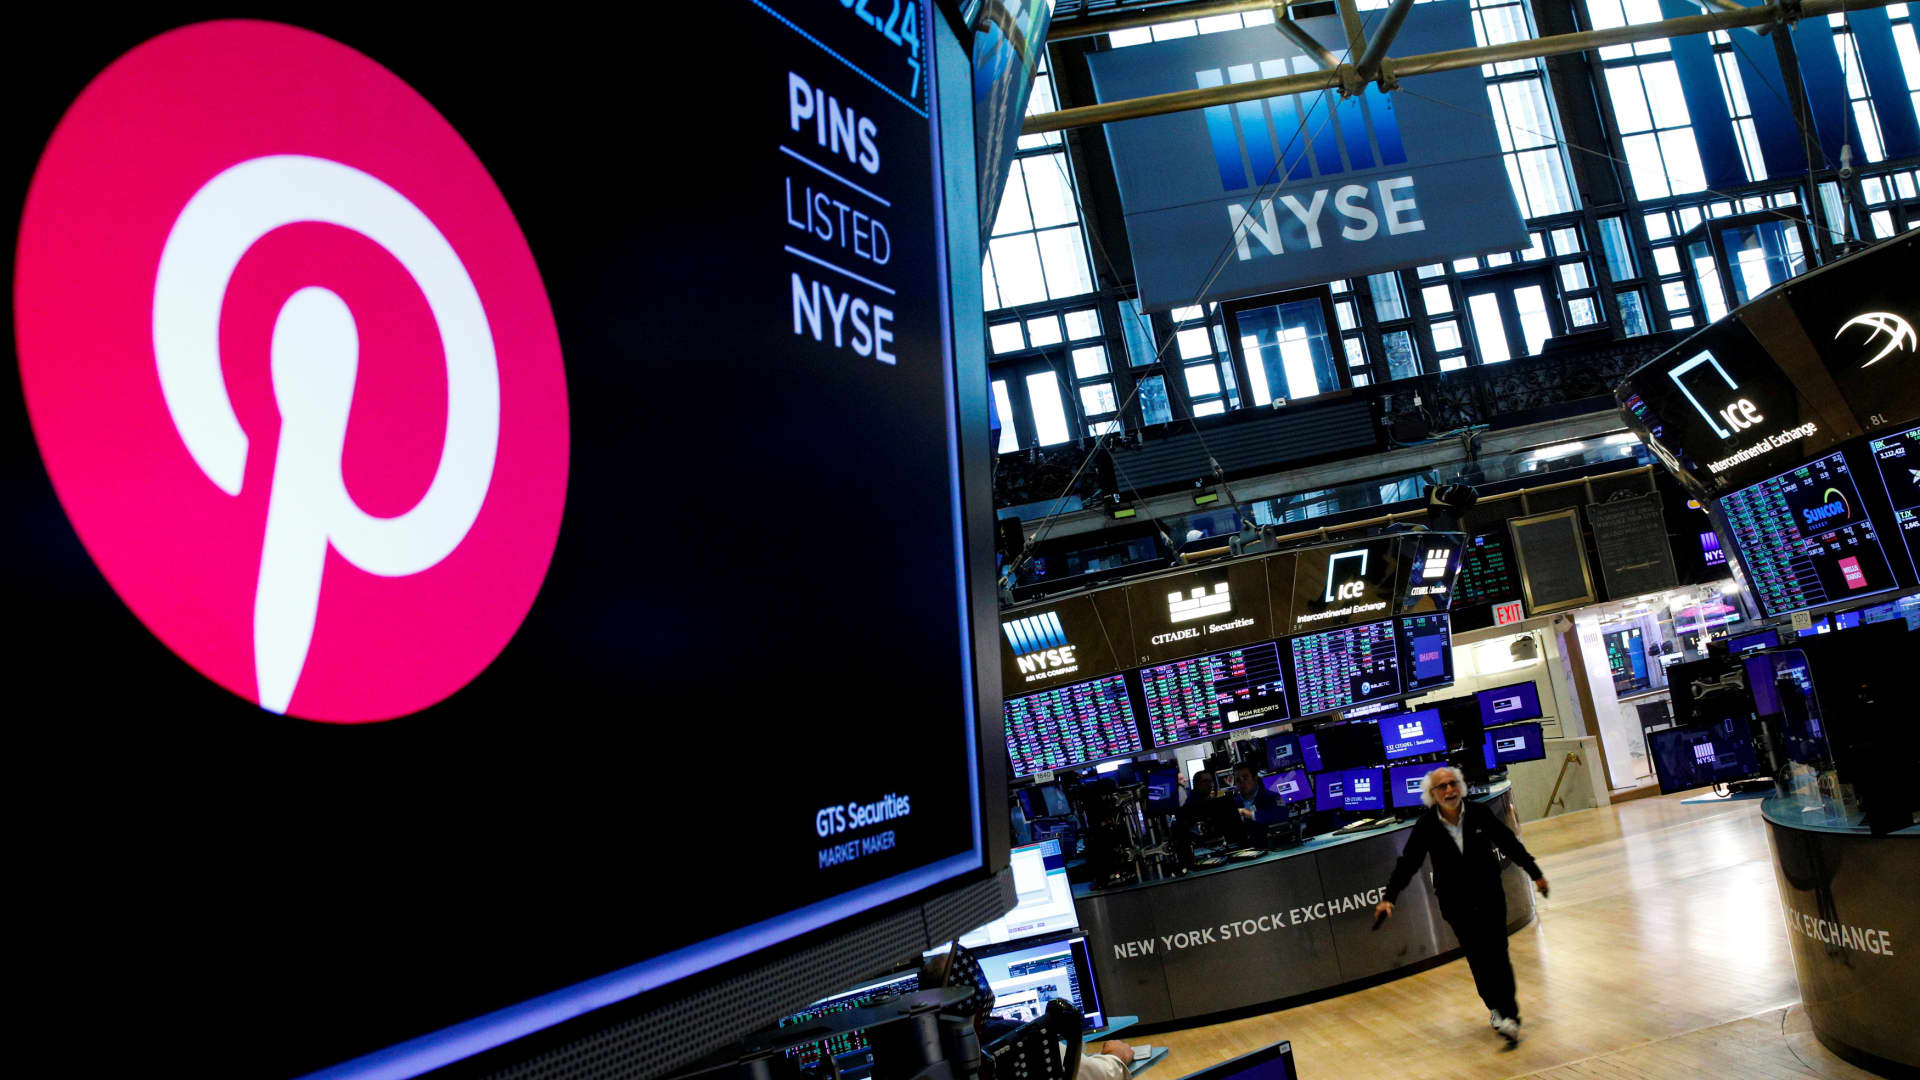 Stocks making the biggest moves after hours: Pinterest, Take-Two Interactive, Expedia and more